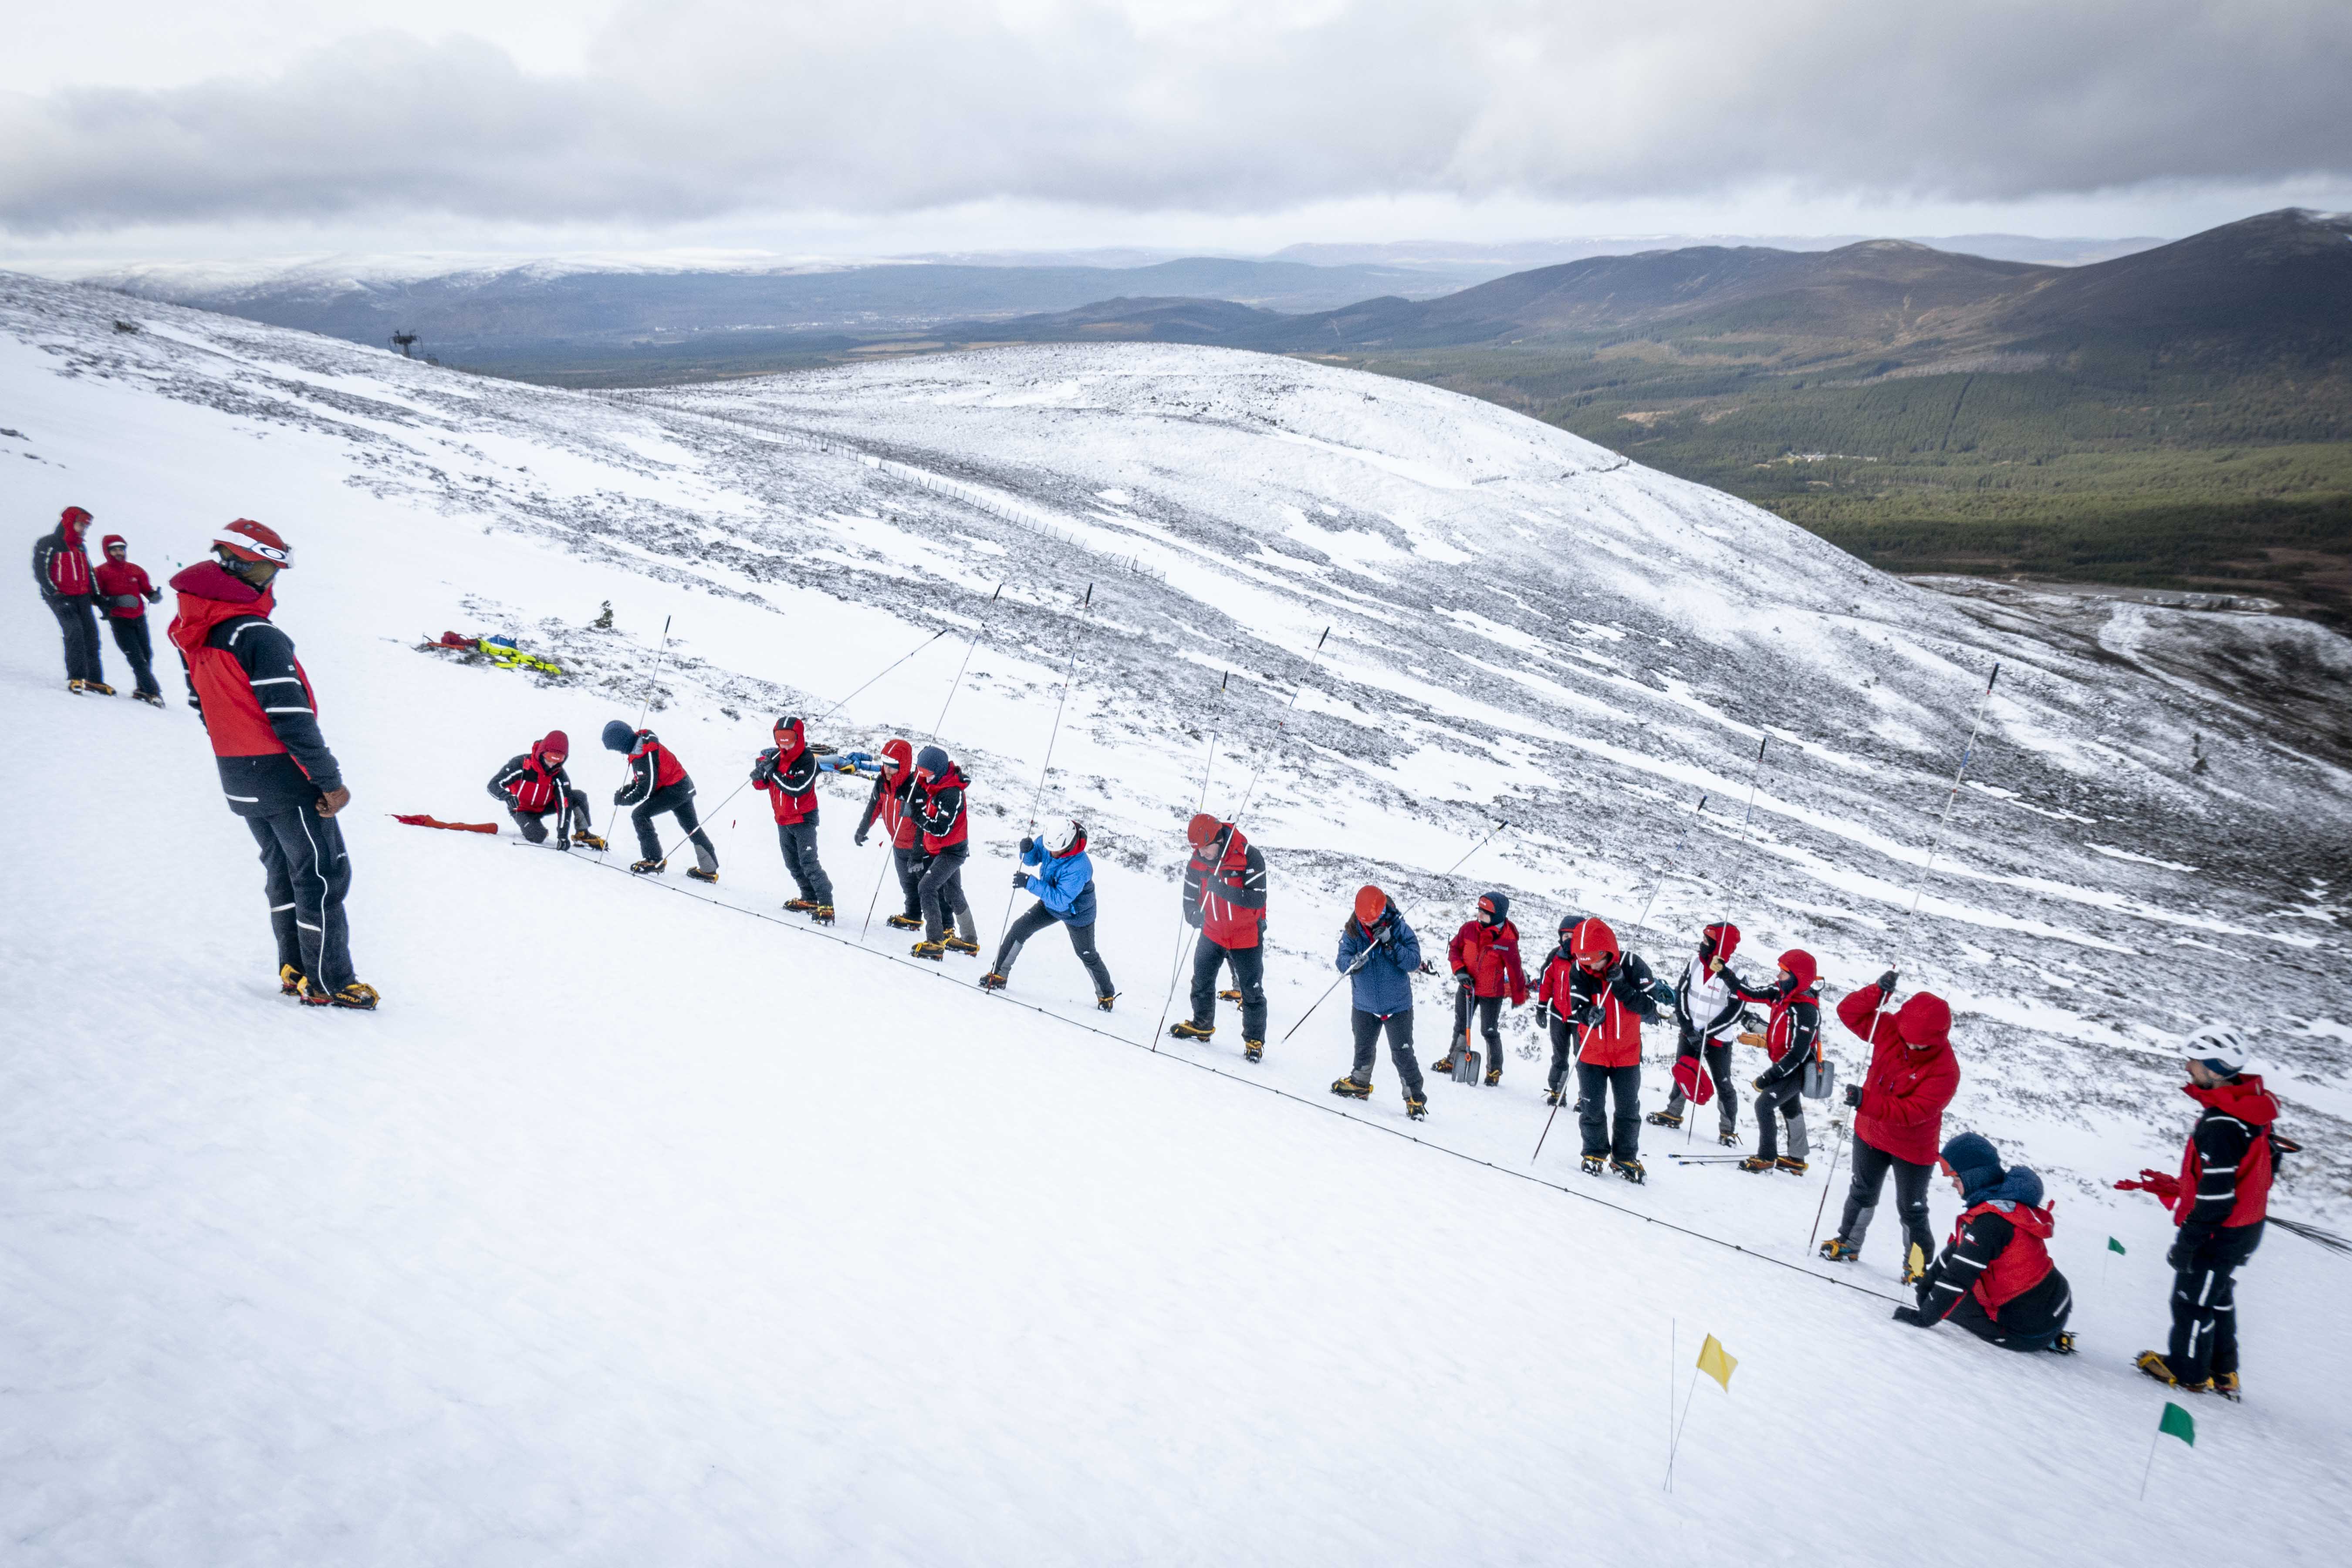 Image shows Mountain Rescue Team on a snowy mountain with climbing equipment.